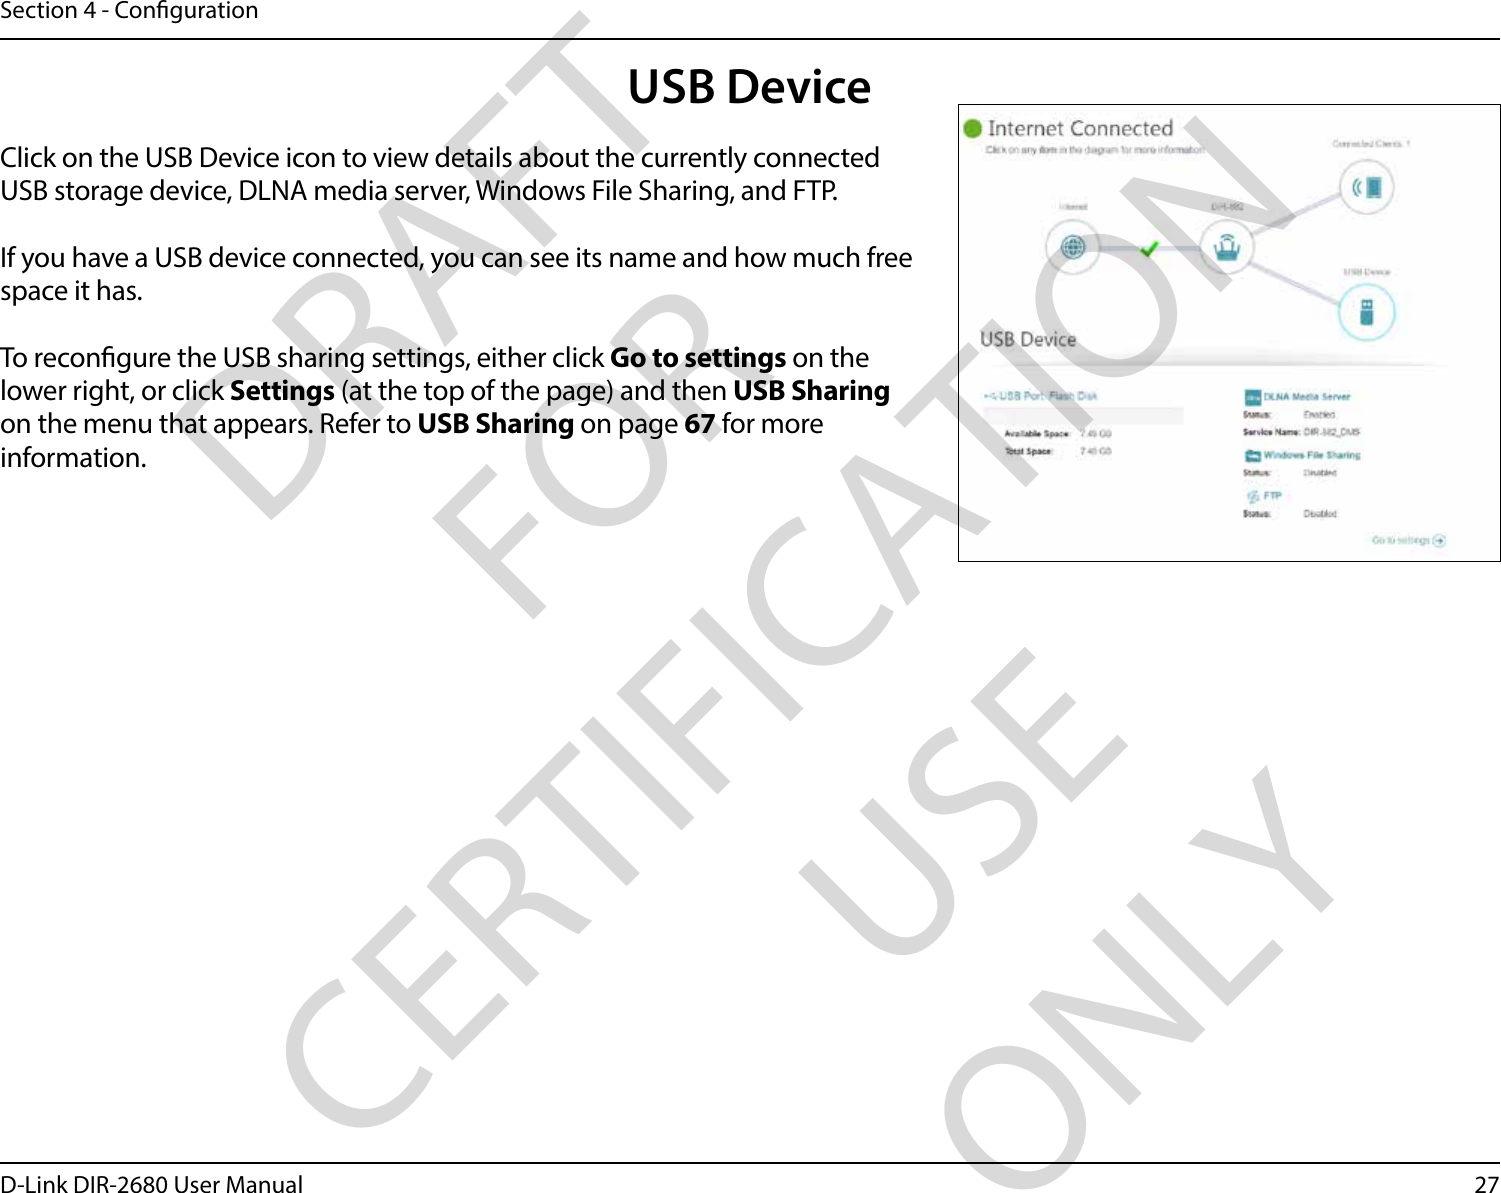 27D-Link DIR-2680 User ManualSection 4 - CongurationUSB DeviceClick on the USB Device icon to view details about the currently connected USB storage device, DLNA media server, Windows File Sharing, and FTP.If you have a USB device connected, you can see its name and how much free space it has. To recongure the USB sharing settings, either click Go to settings on the lower right, or click Settings (at the top of the page) and then USB Sharing on the menu that appears. Refer to USB Sharing on page 67 for more information.DRAFT FOR CERTIFICATION USE ONLY